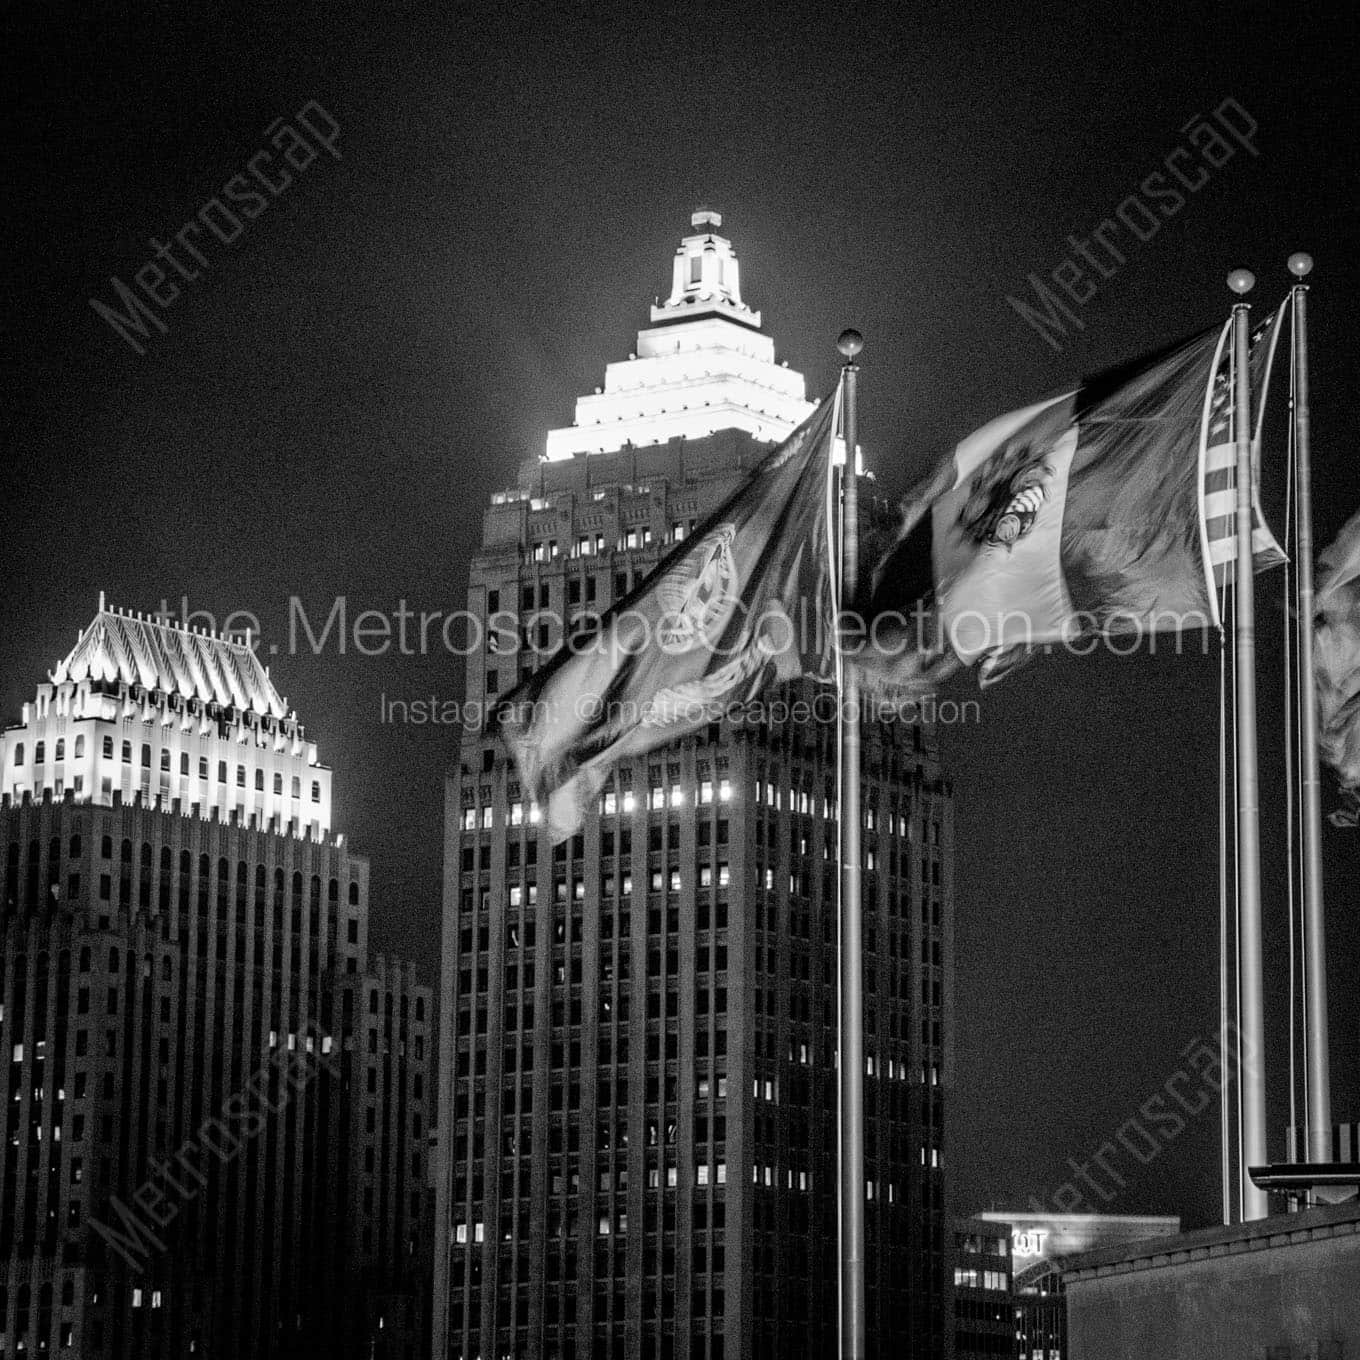 pittsburgh city allegheny county flags at night Black & White Wall Art